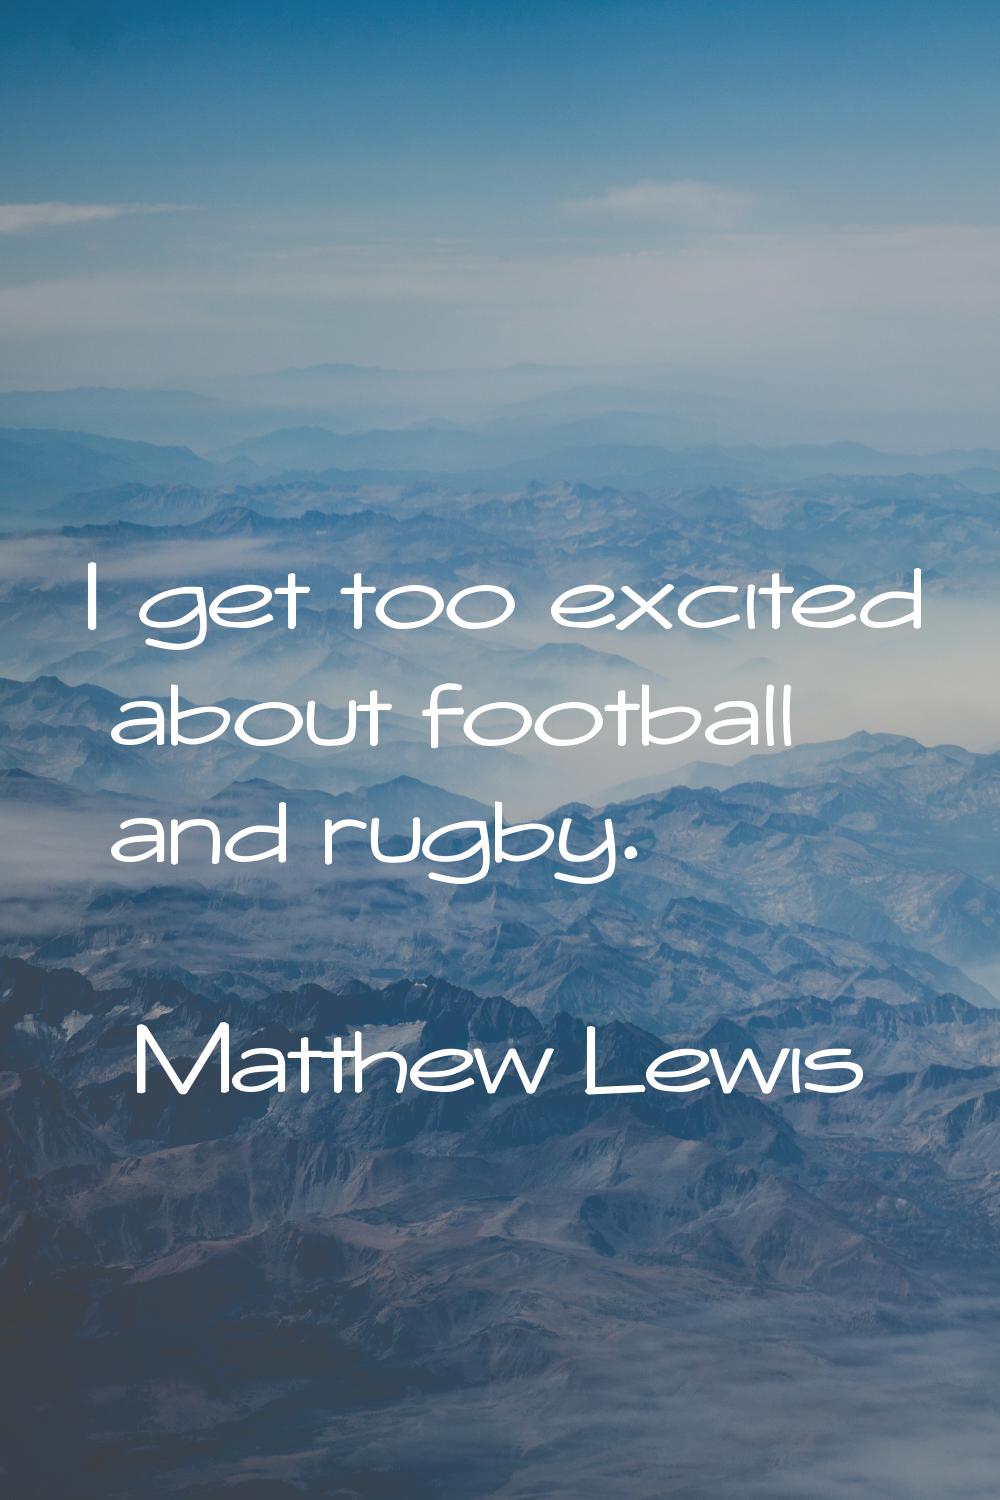 I get too excited about football and rugby.